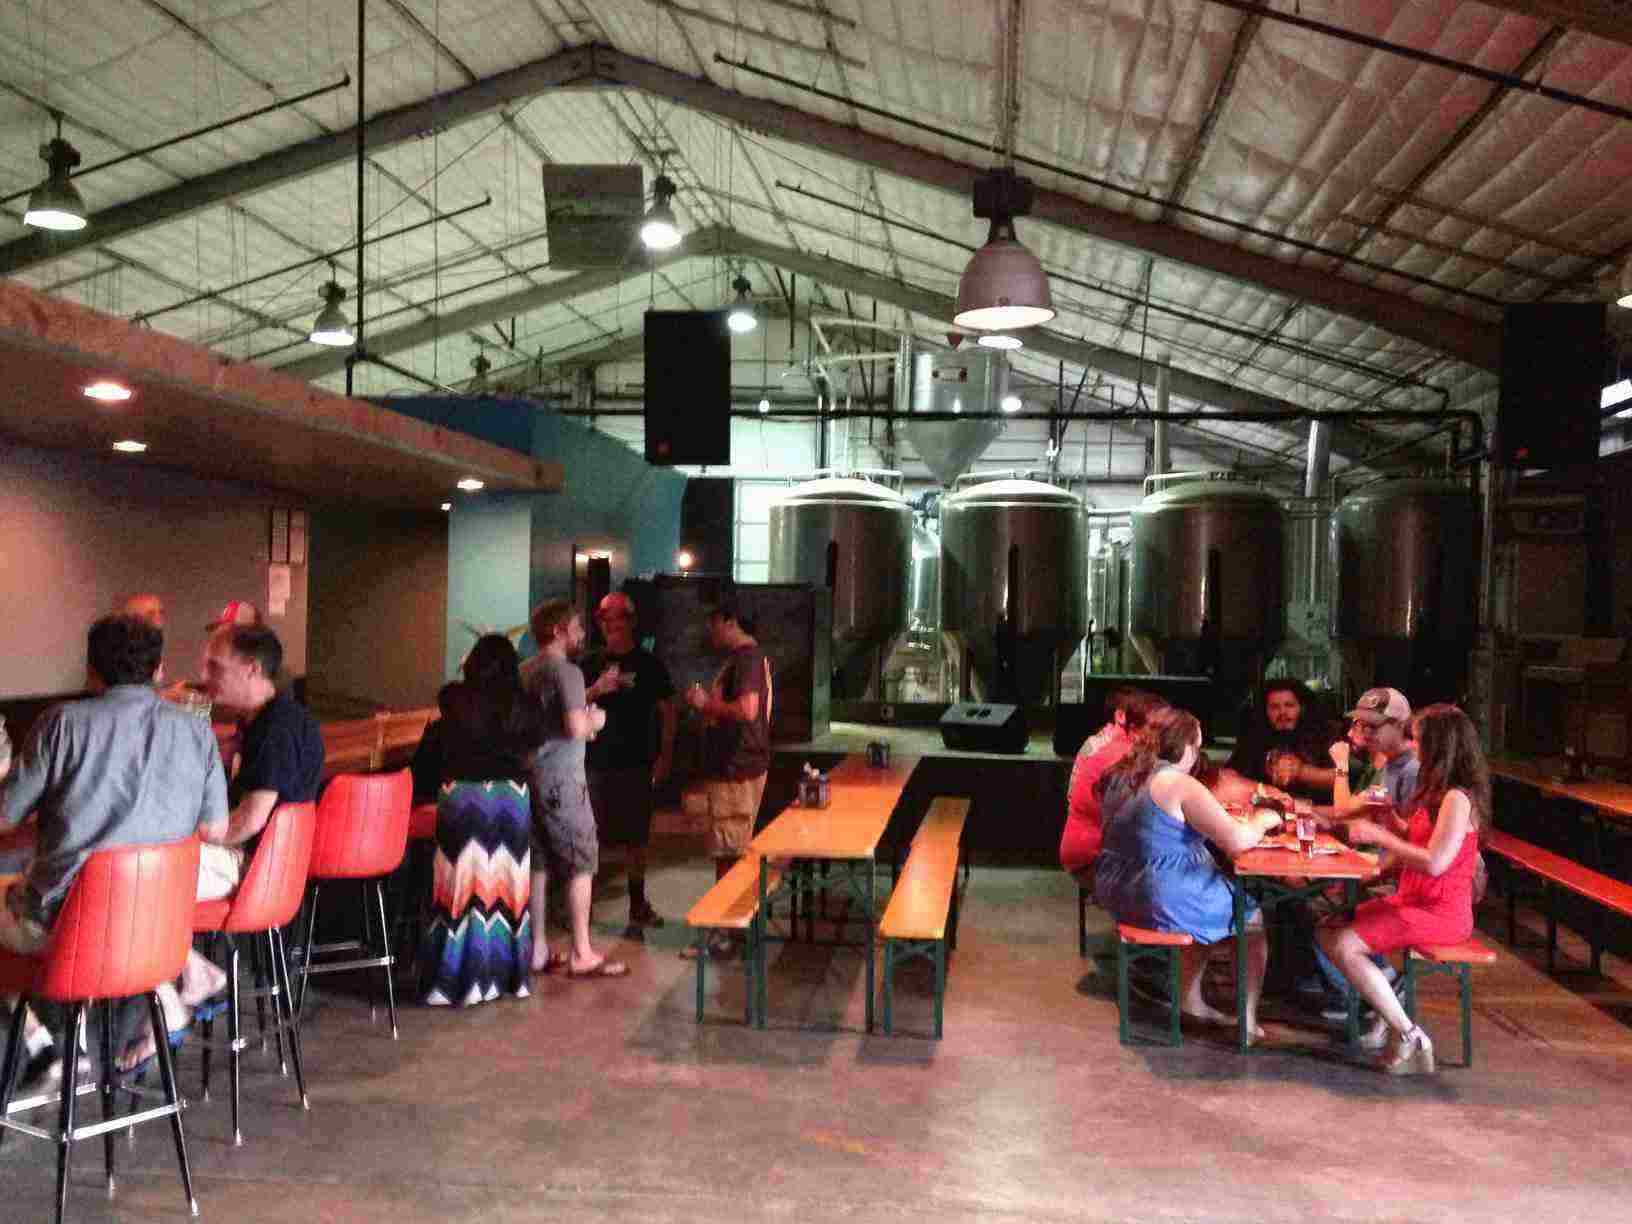 The ABGB Makes It Better Austin Beer Garden Brewing Co. opens for